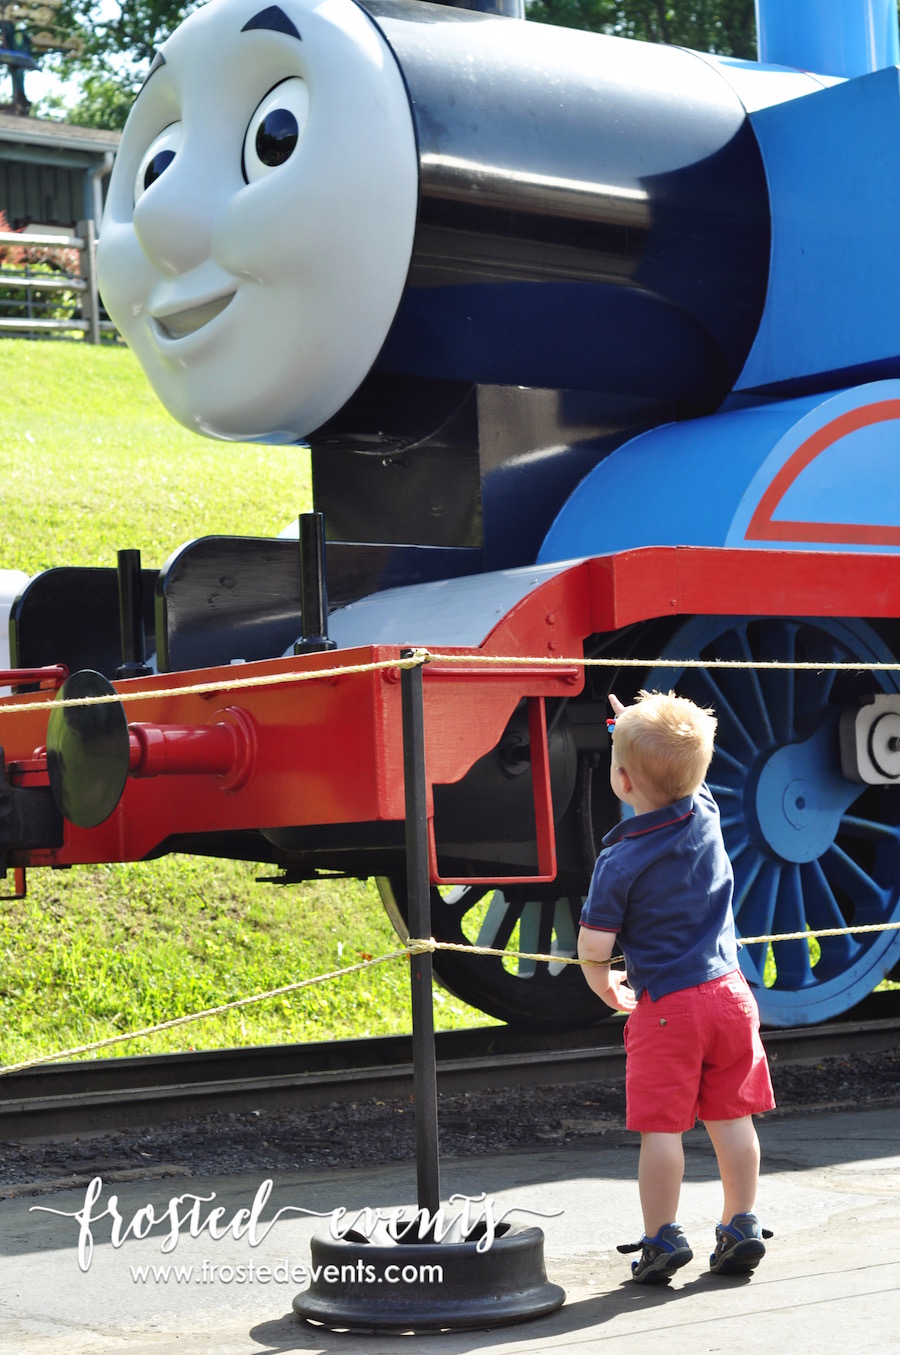 Day Out with Thomas the Train Review- Frosted Events frostedevents.com 